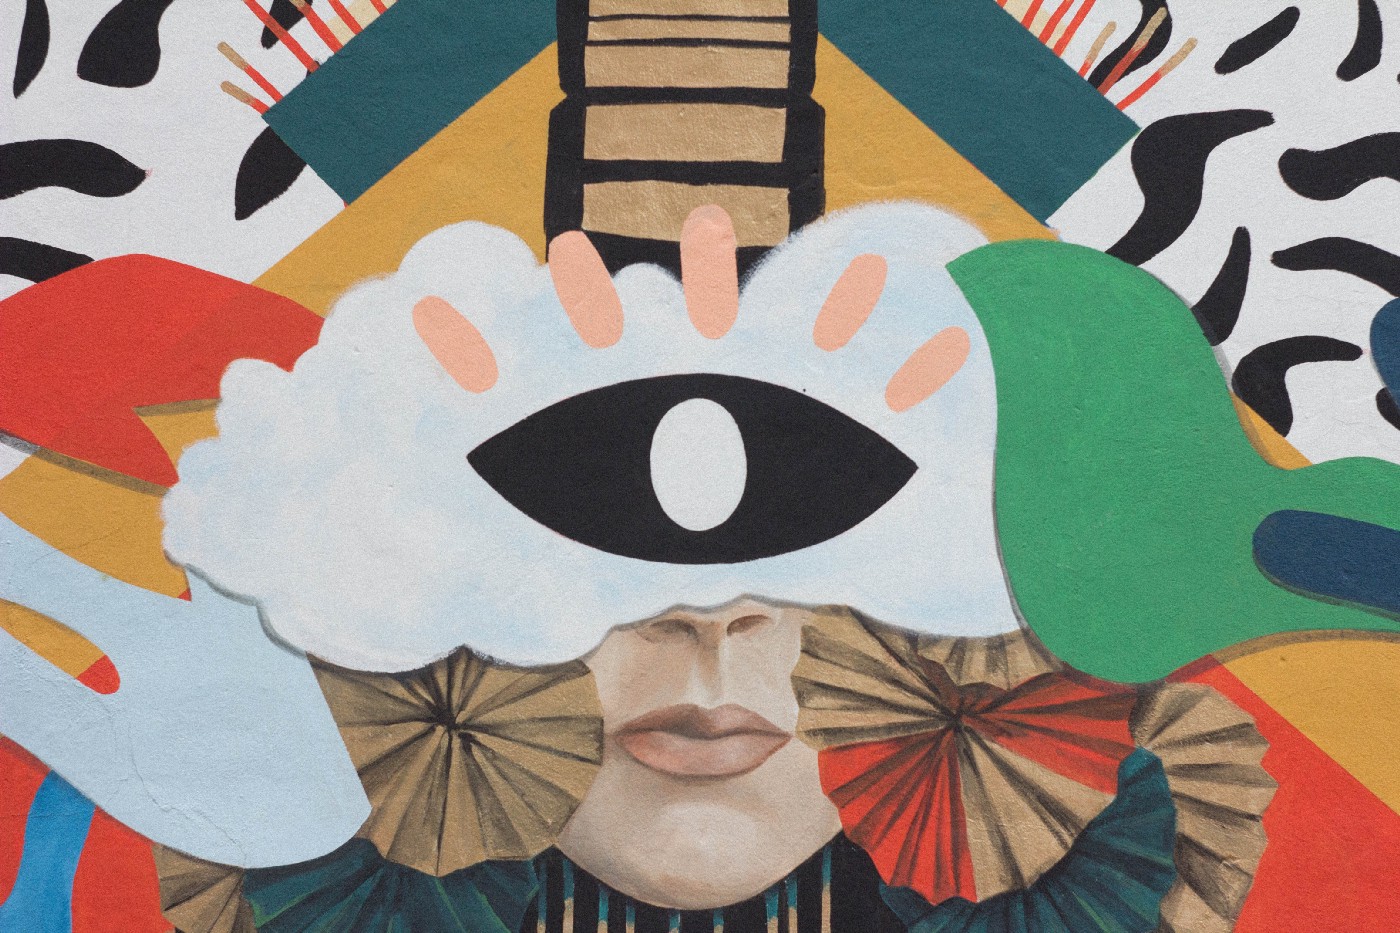 Part of a face surrounded by colourful images, looks like a wall-painting, with big black-and-white eye where the forehead would be if it weren’t behind what looks like a cloud